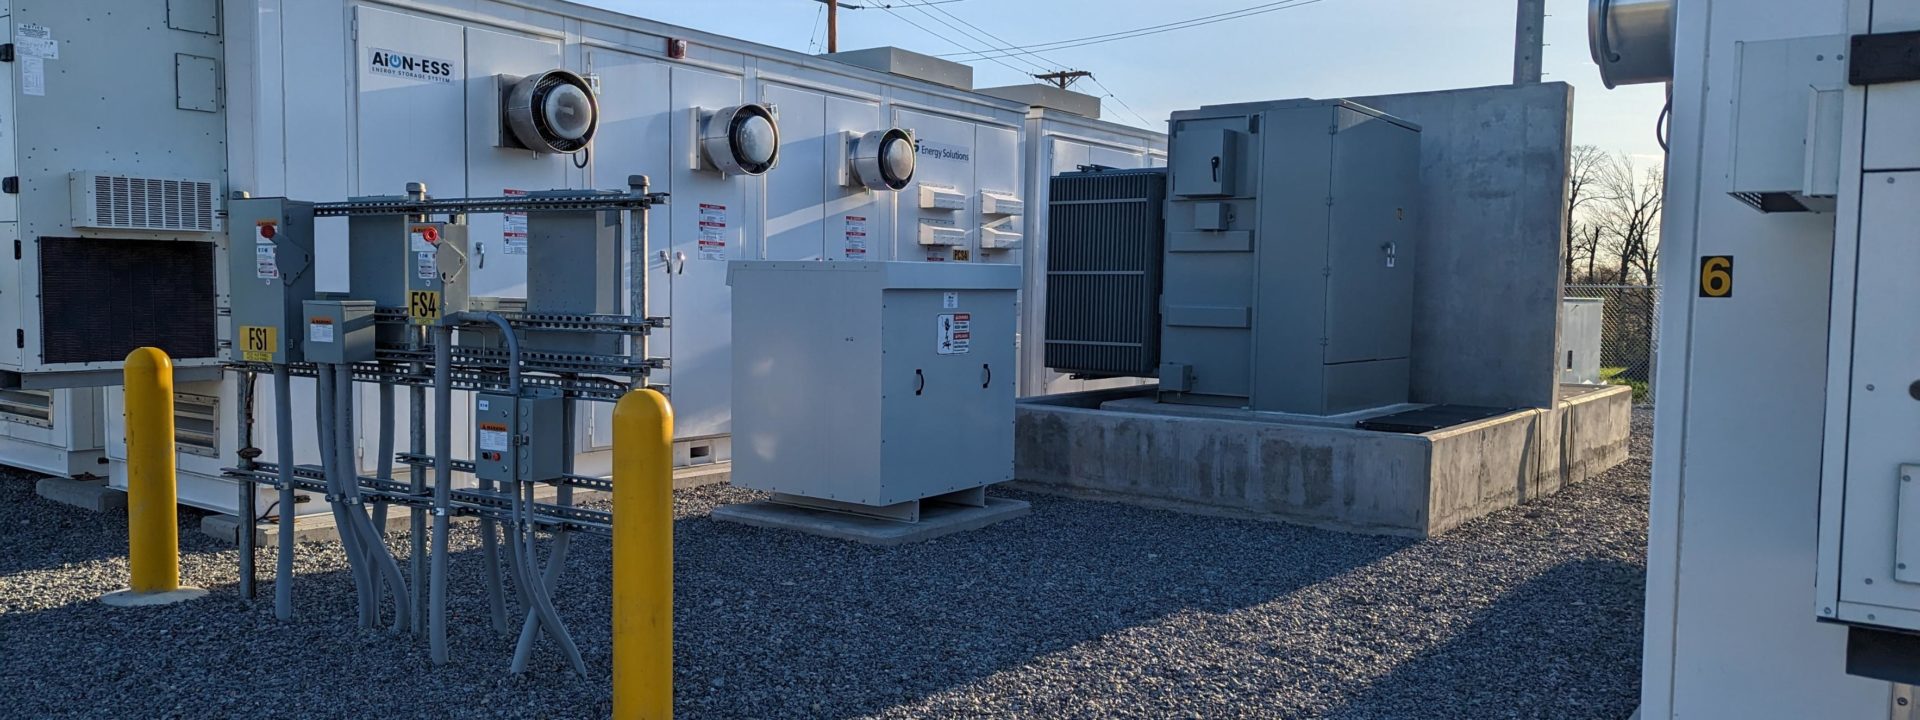 Two Vermont batteries among first to be financed under new storage ITC